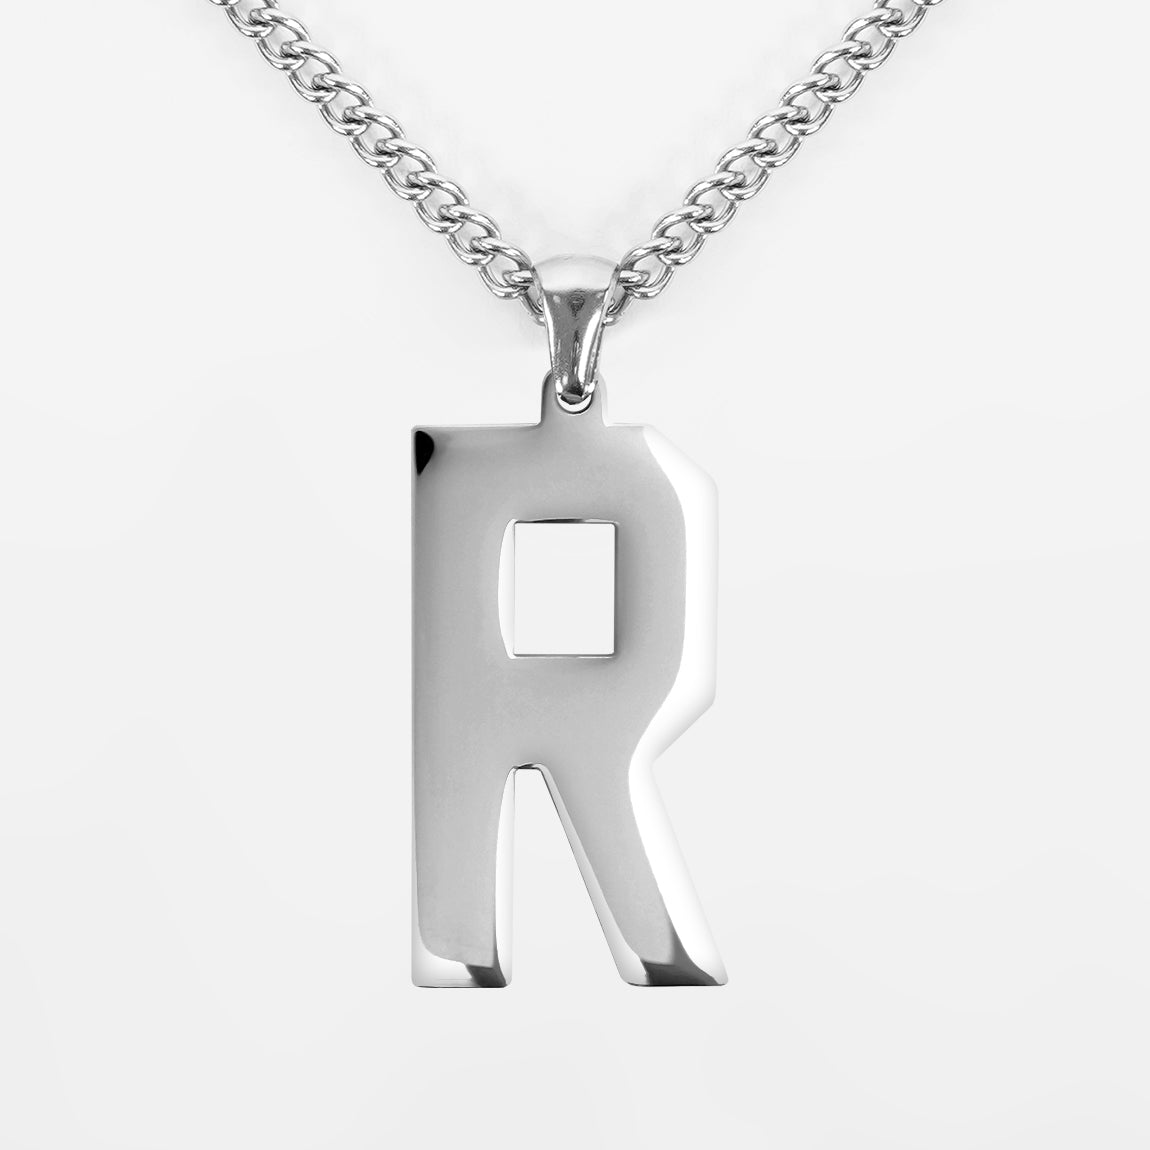 R Letter Pendant with Chain Necklace - Stainless Steel